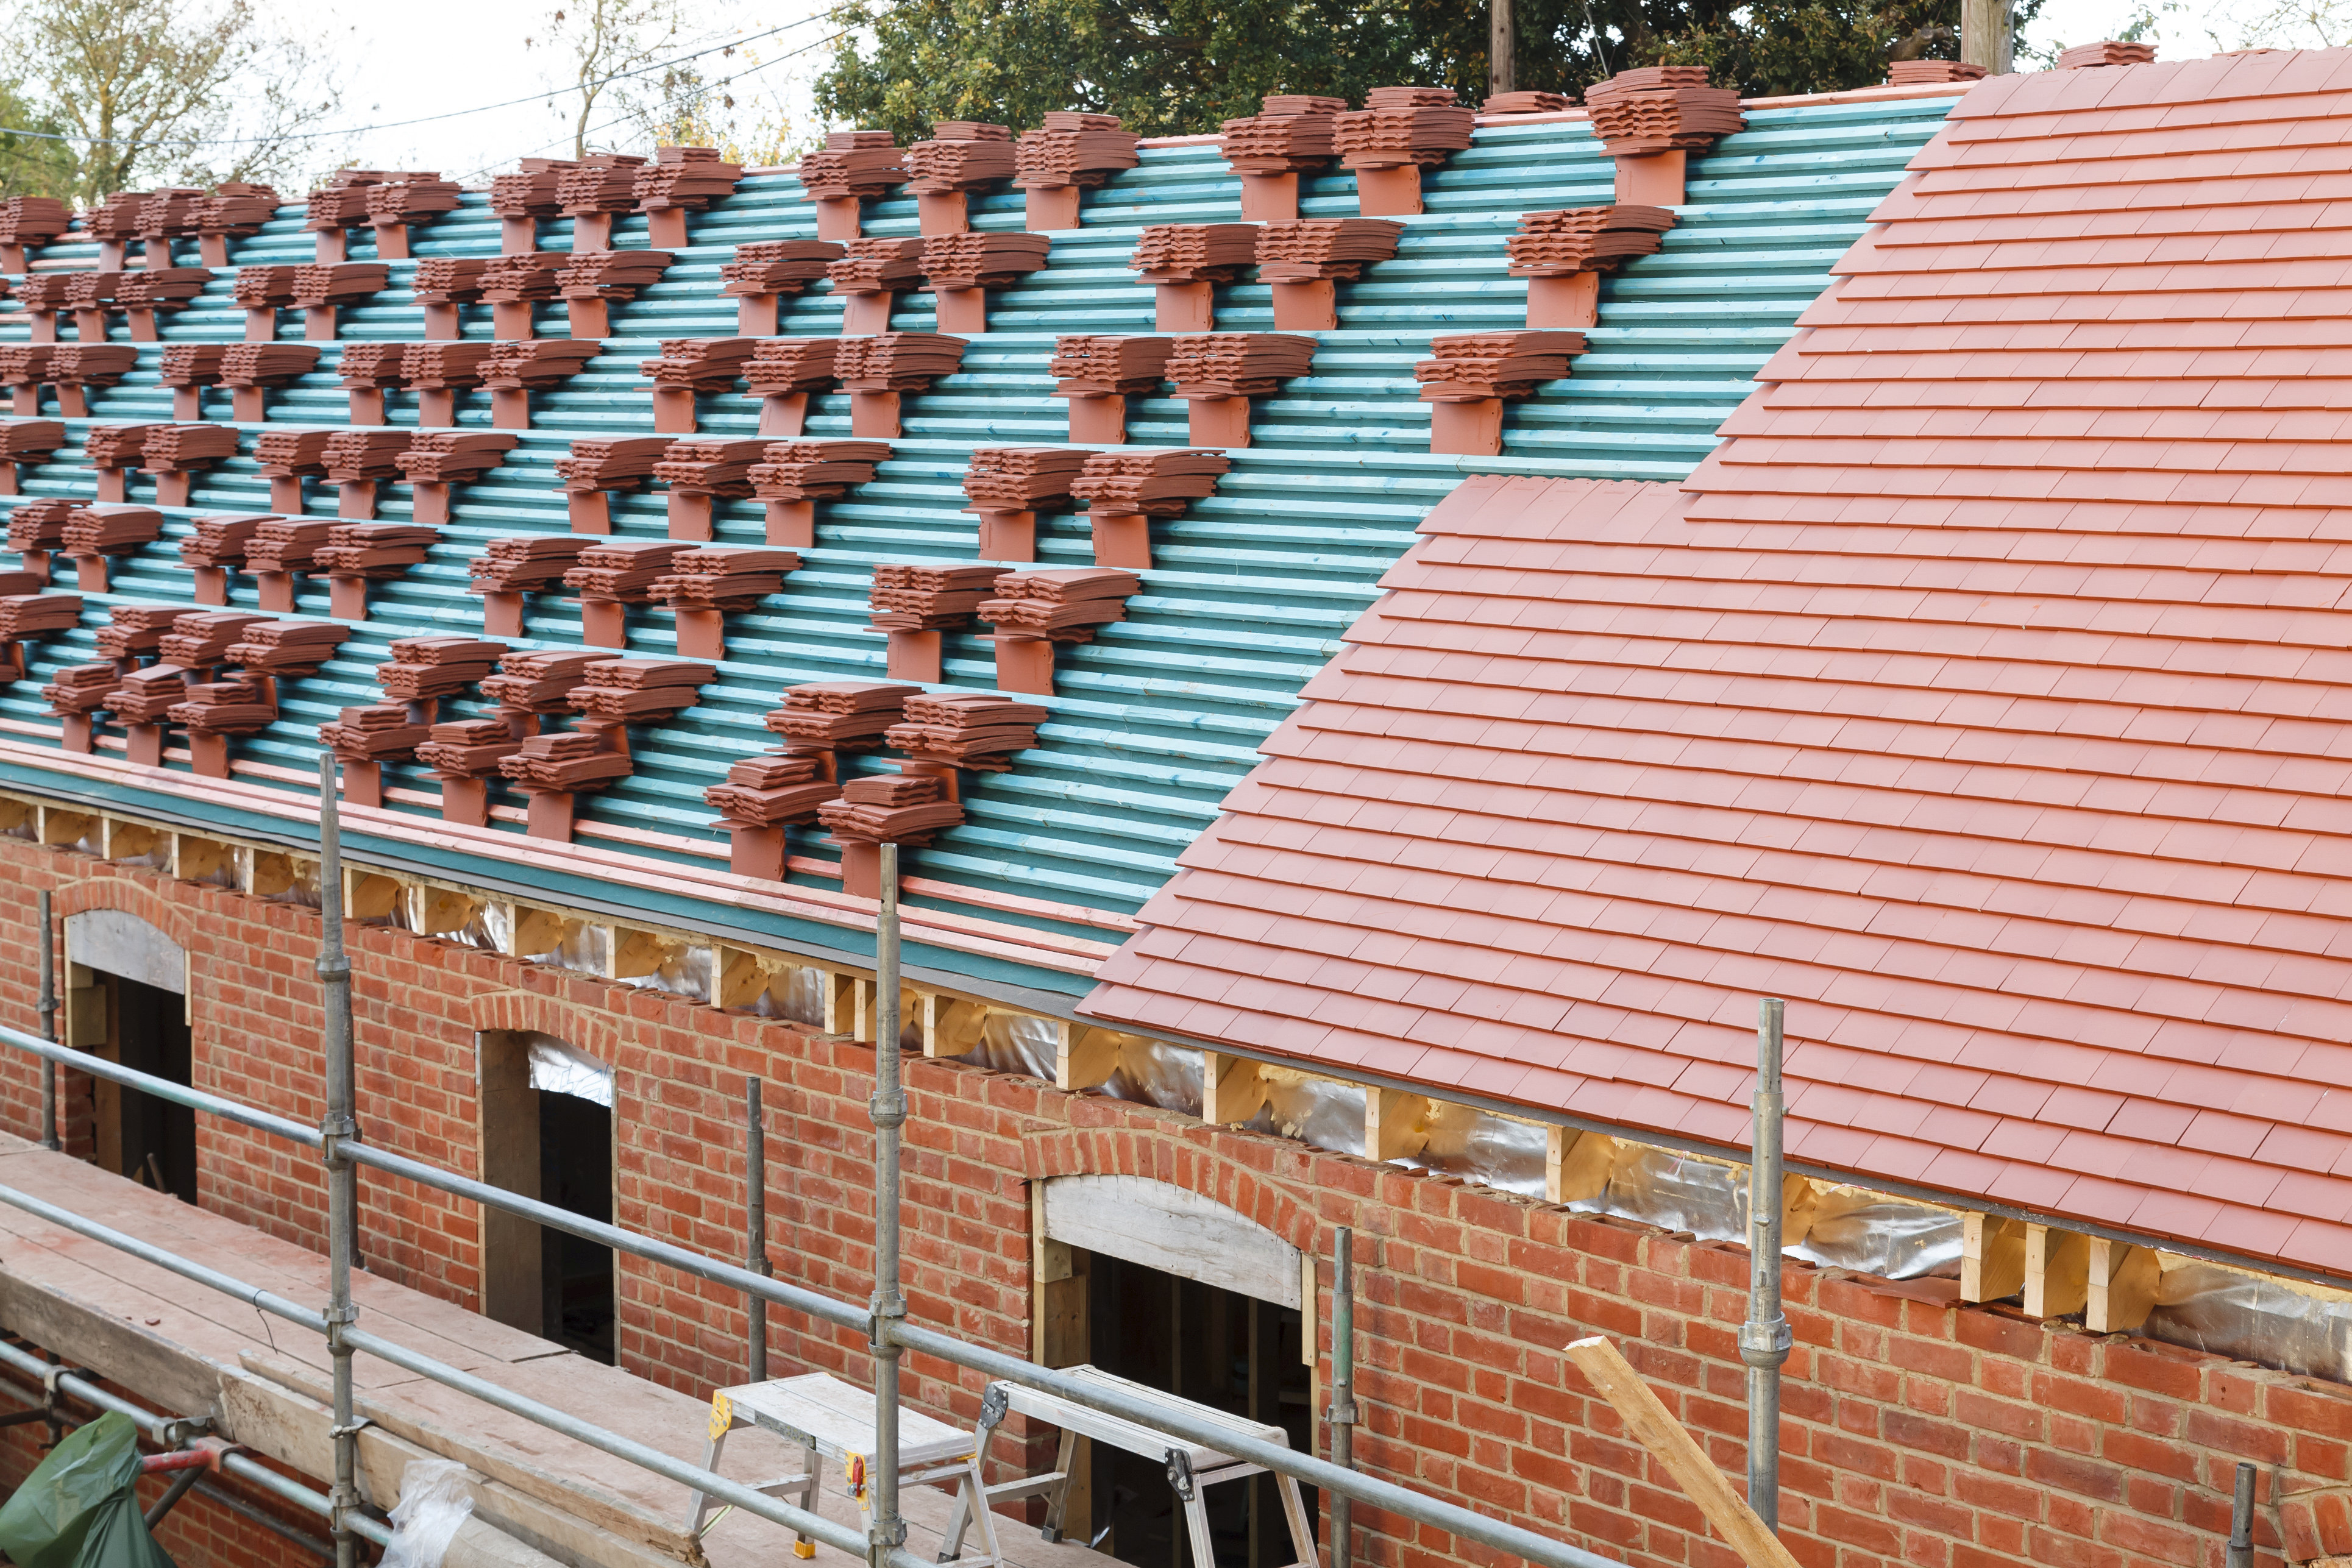 Clay Roof Tiles Pros And Cons, How To Install A Clay Tile Roof